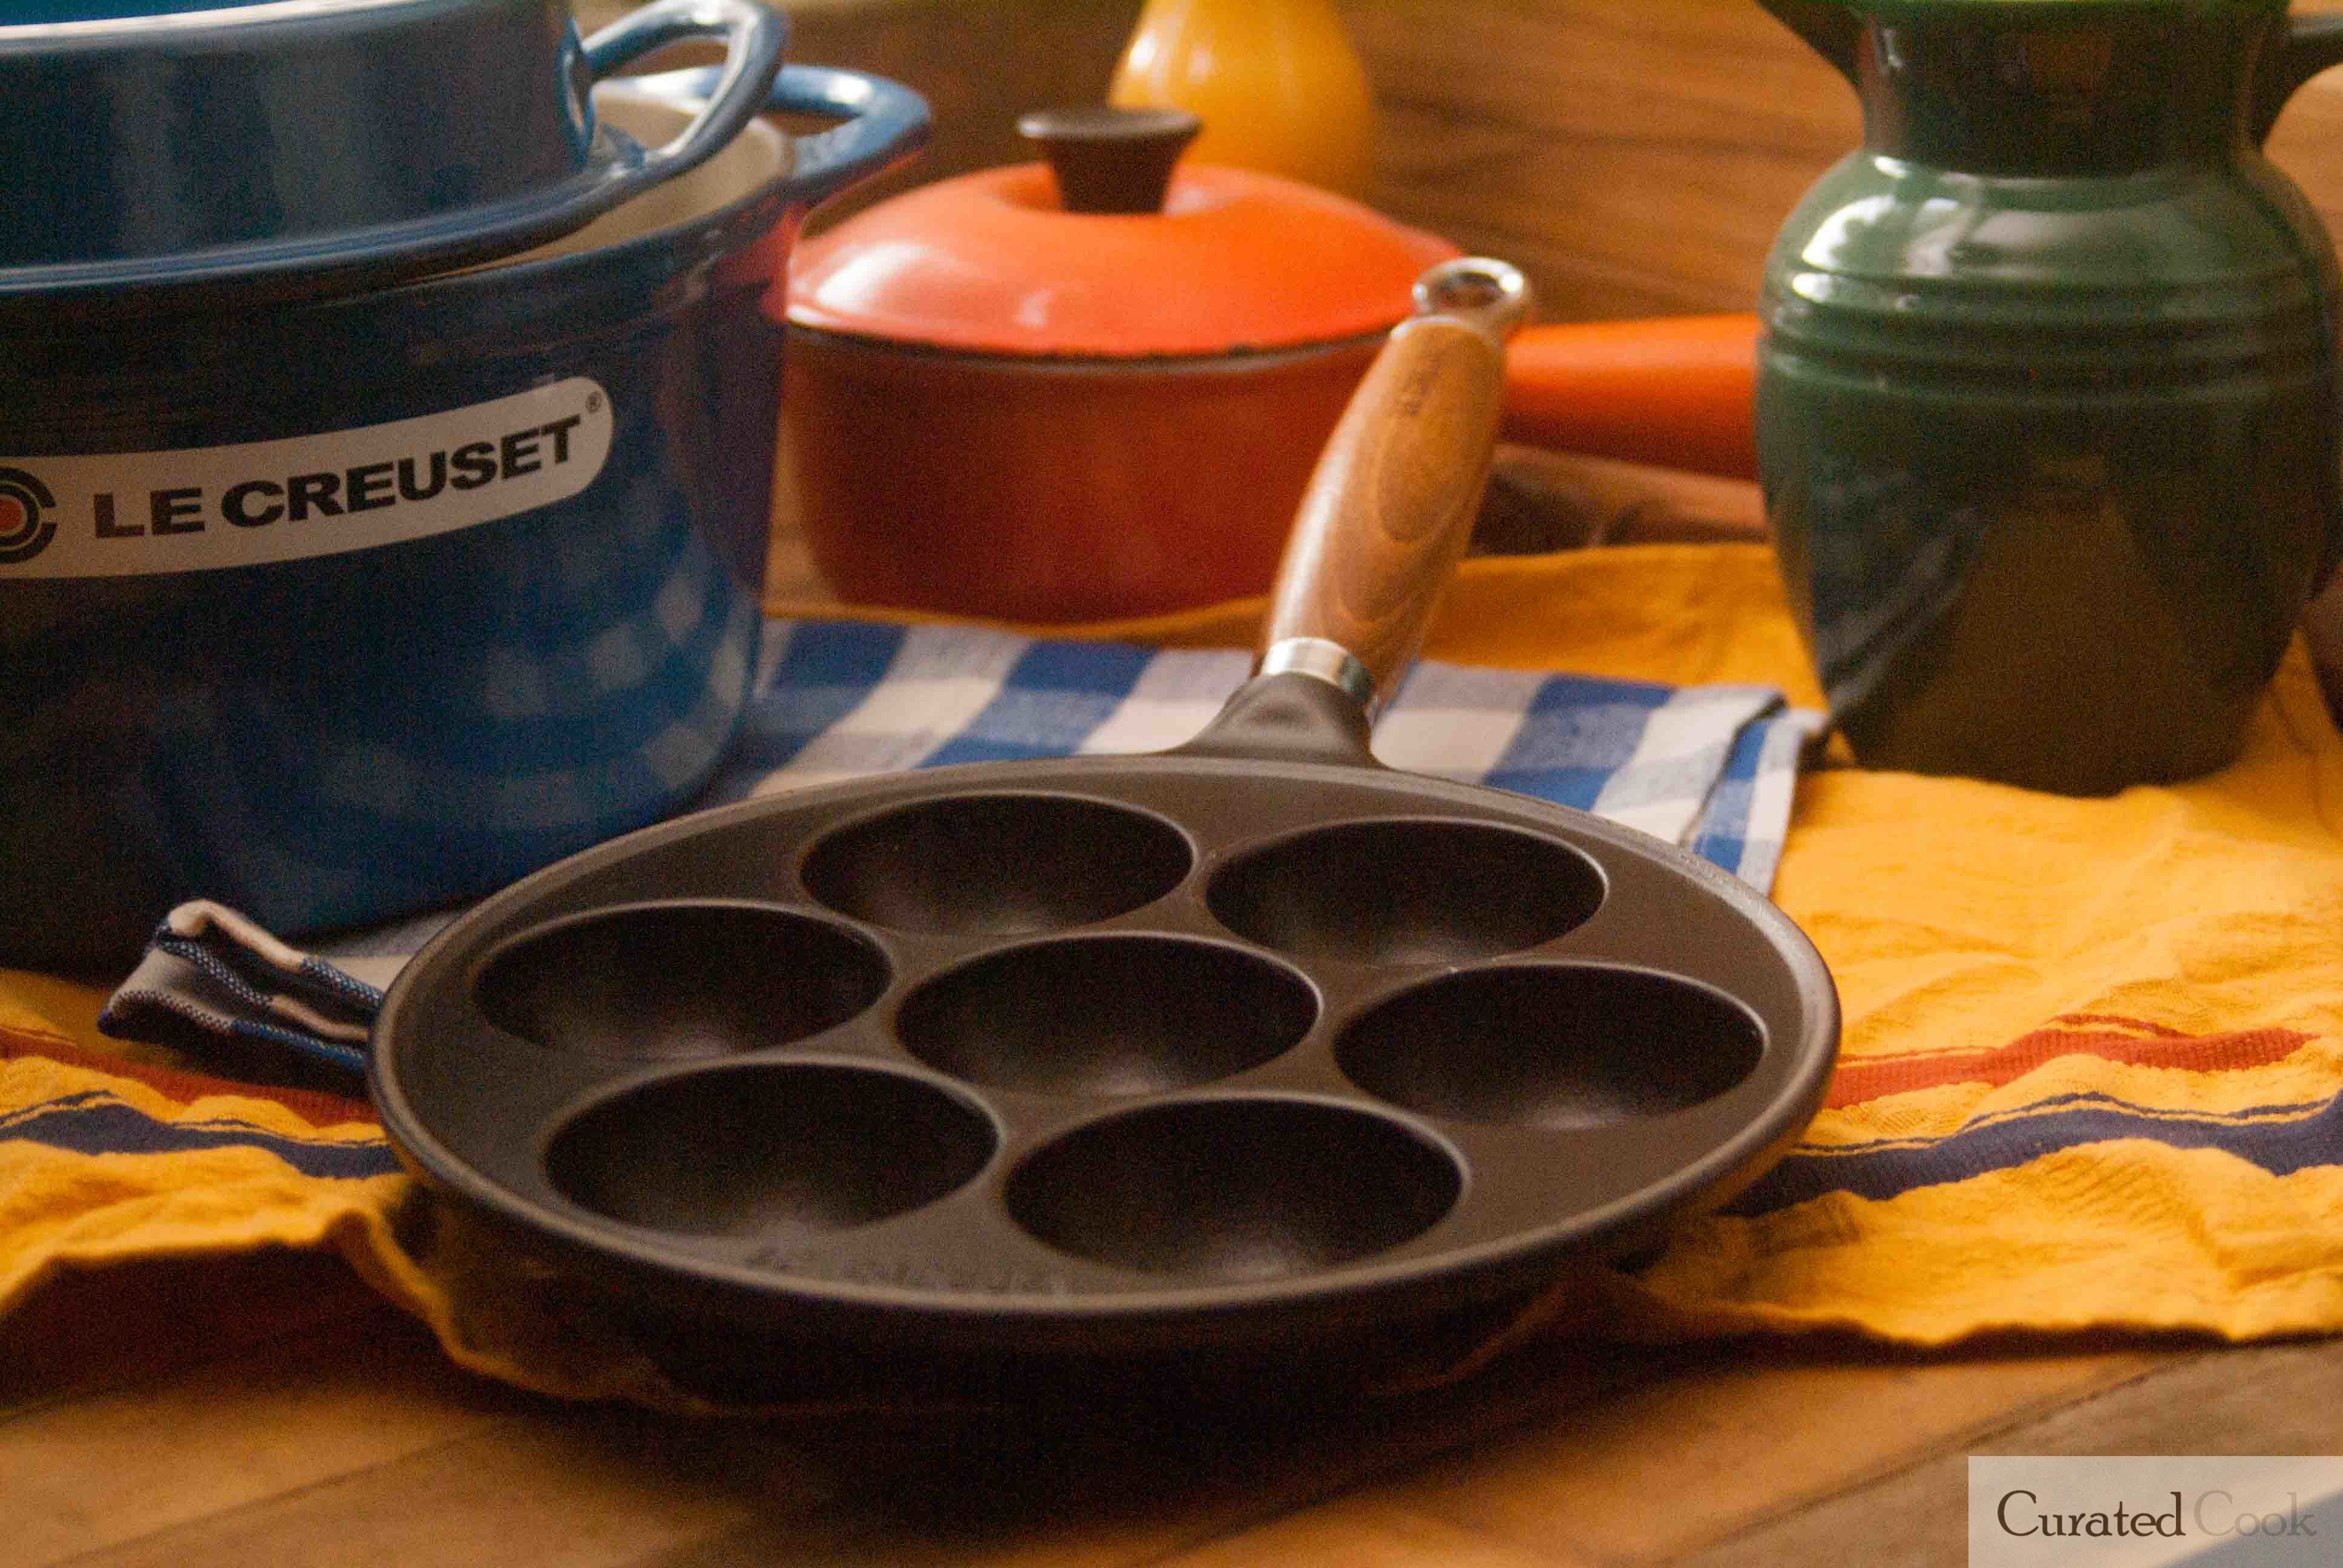 Le Creuset Takoyaki Pan X Ebelskivers Pan Review - Curated Cook All Clad Curated Vs Stainless Steel